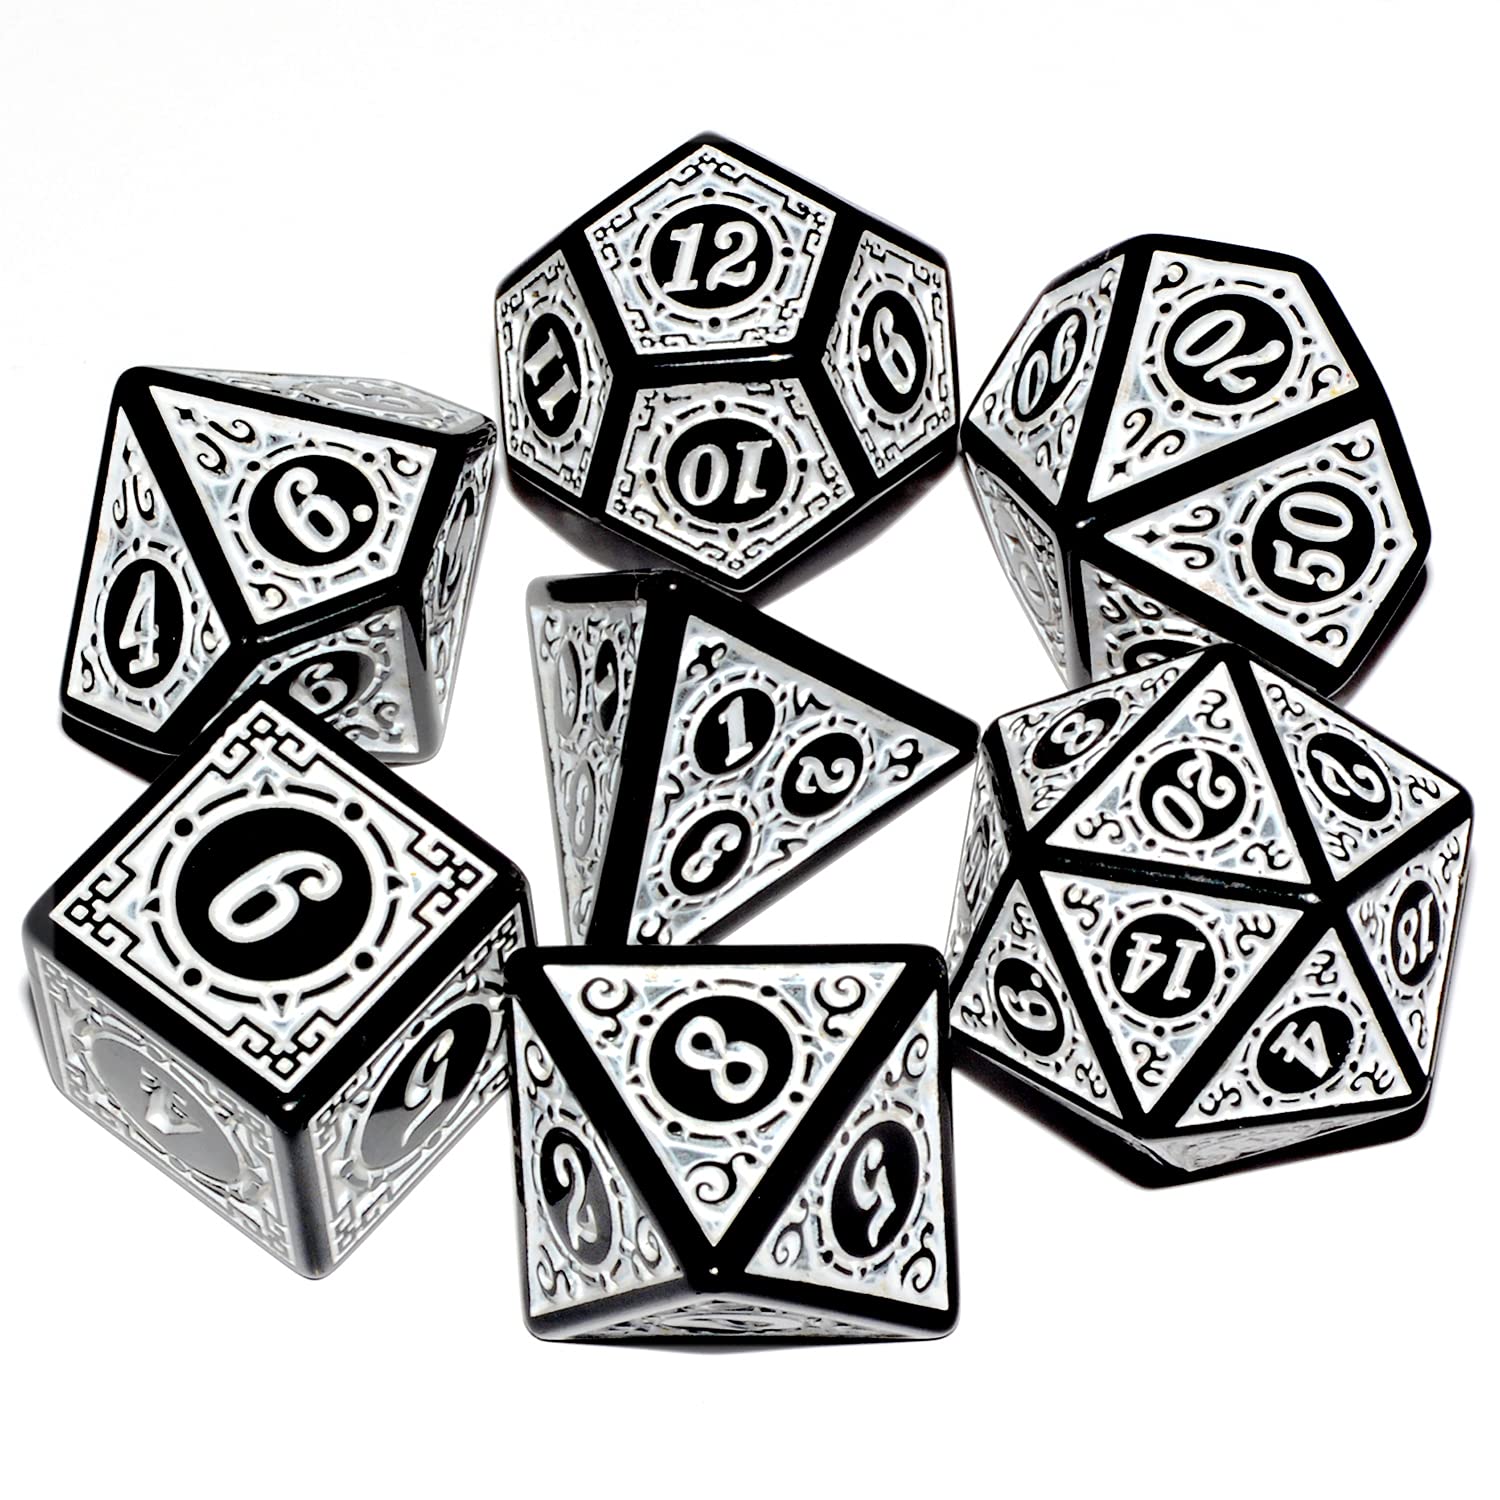 DND Dice 7Pieces, Raised Pattern Black and White Mixed Polyhedral DND Dice for RPG MTG Table Game Dice